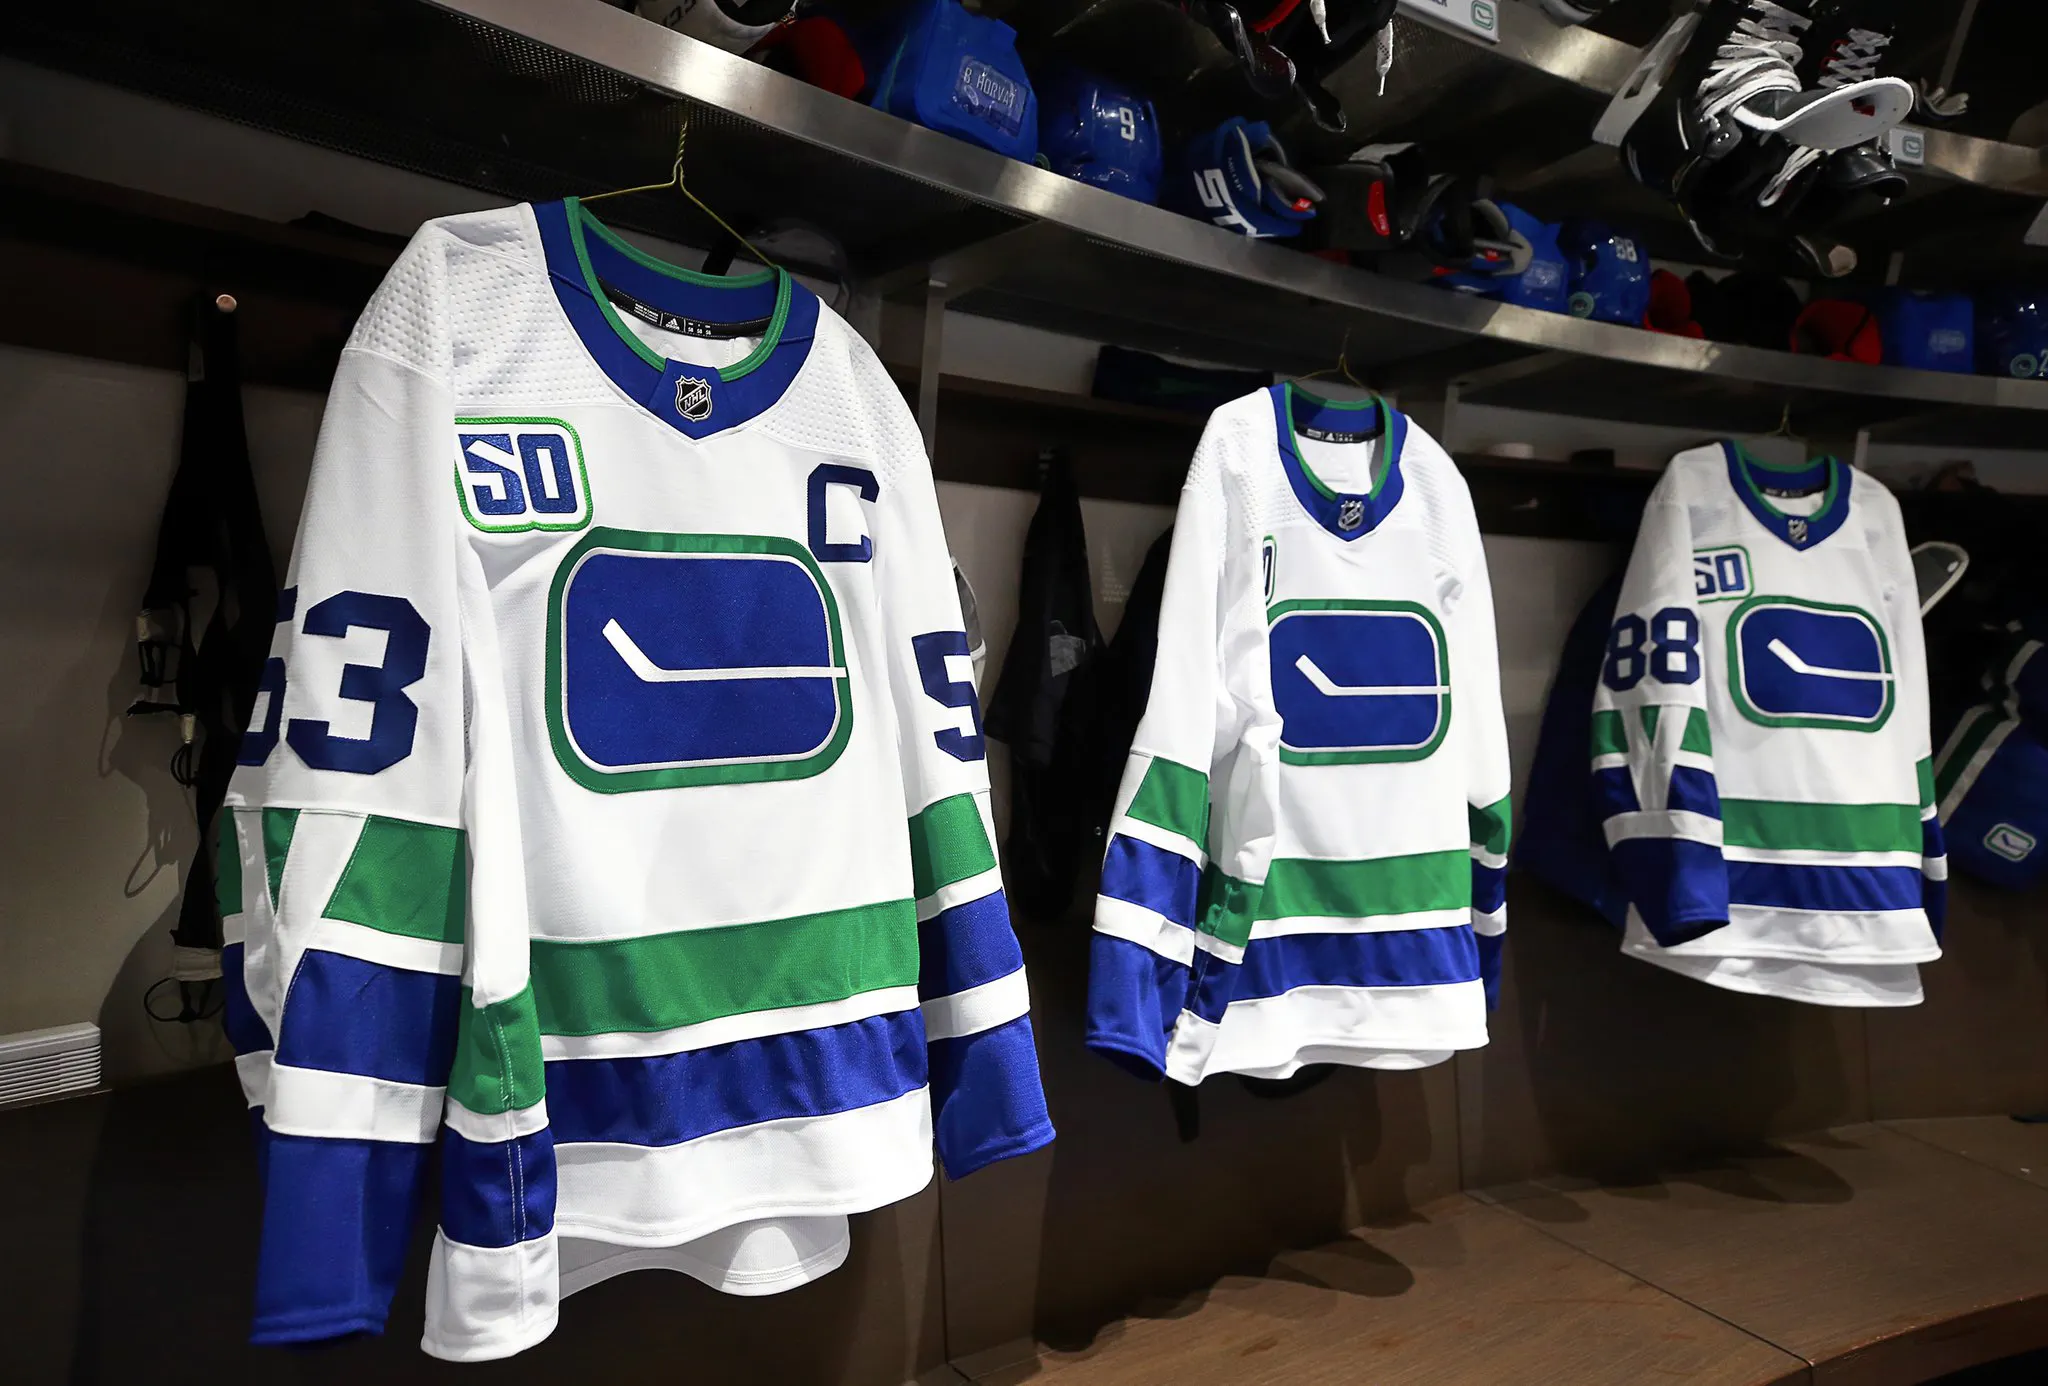 Canucks at 50: The birth of the 'Flying V' uniforms